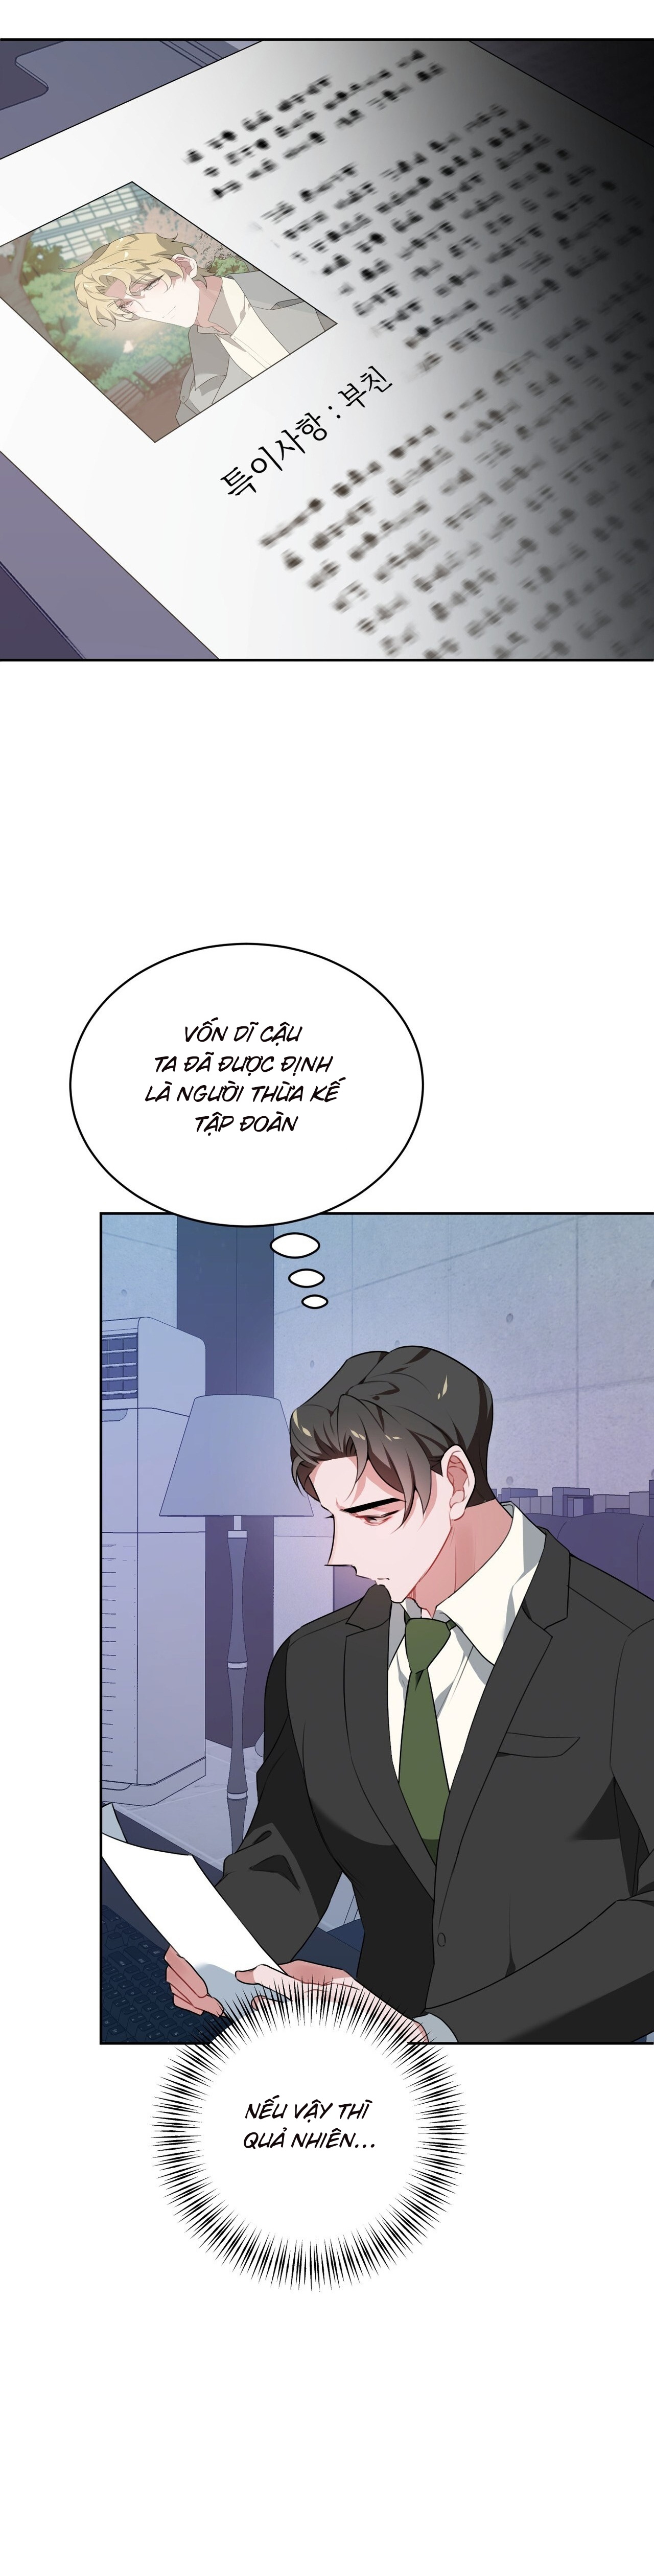 immoral-relationship-chap-4-12